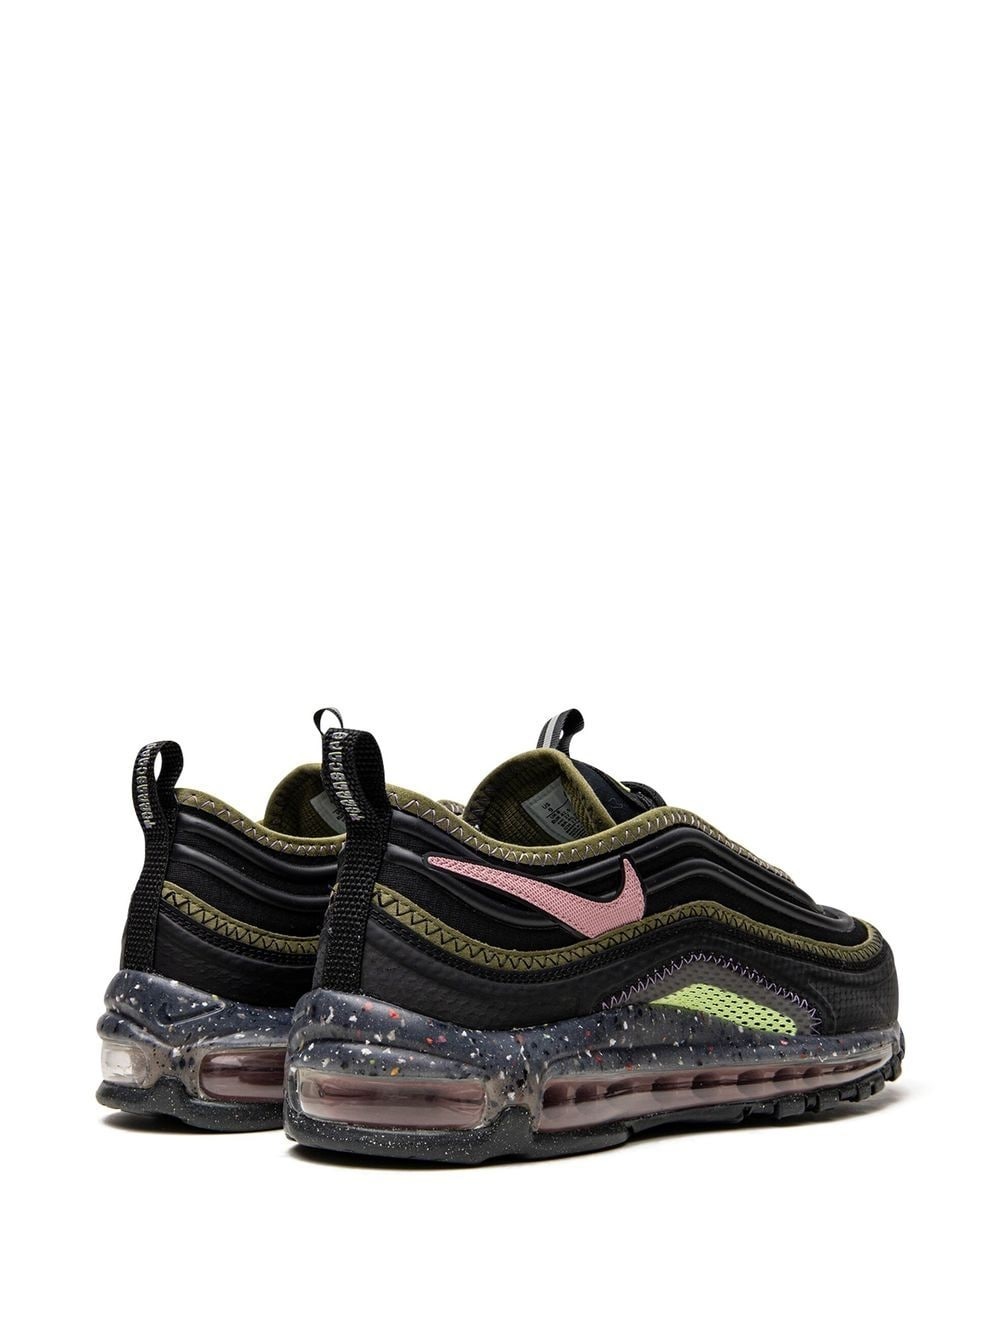 Air Max 97 "Terrascape" sneakers - 3